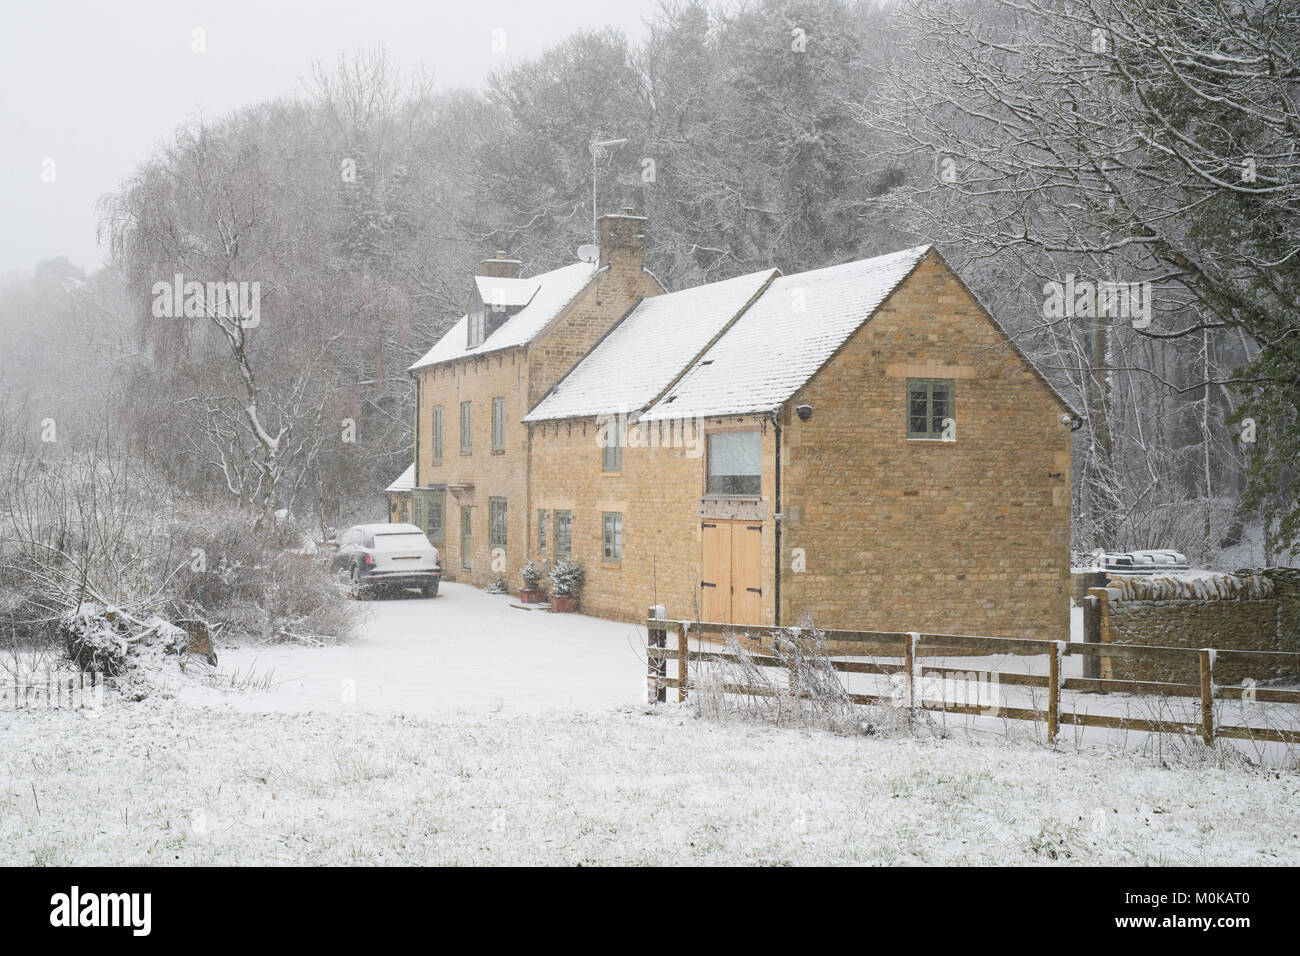 Cotswold Cottage im Schnee im Dezember. Chipping Norton, Cotswolds, Oxfordshire, England Stockfoto